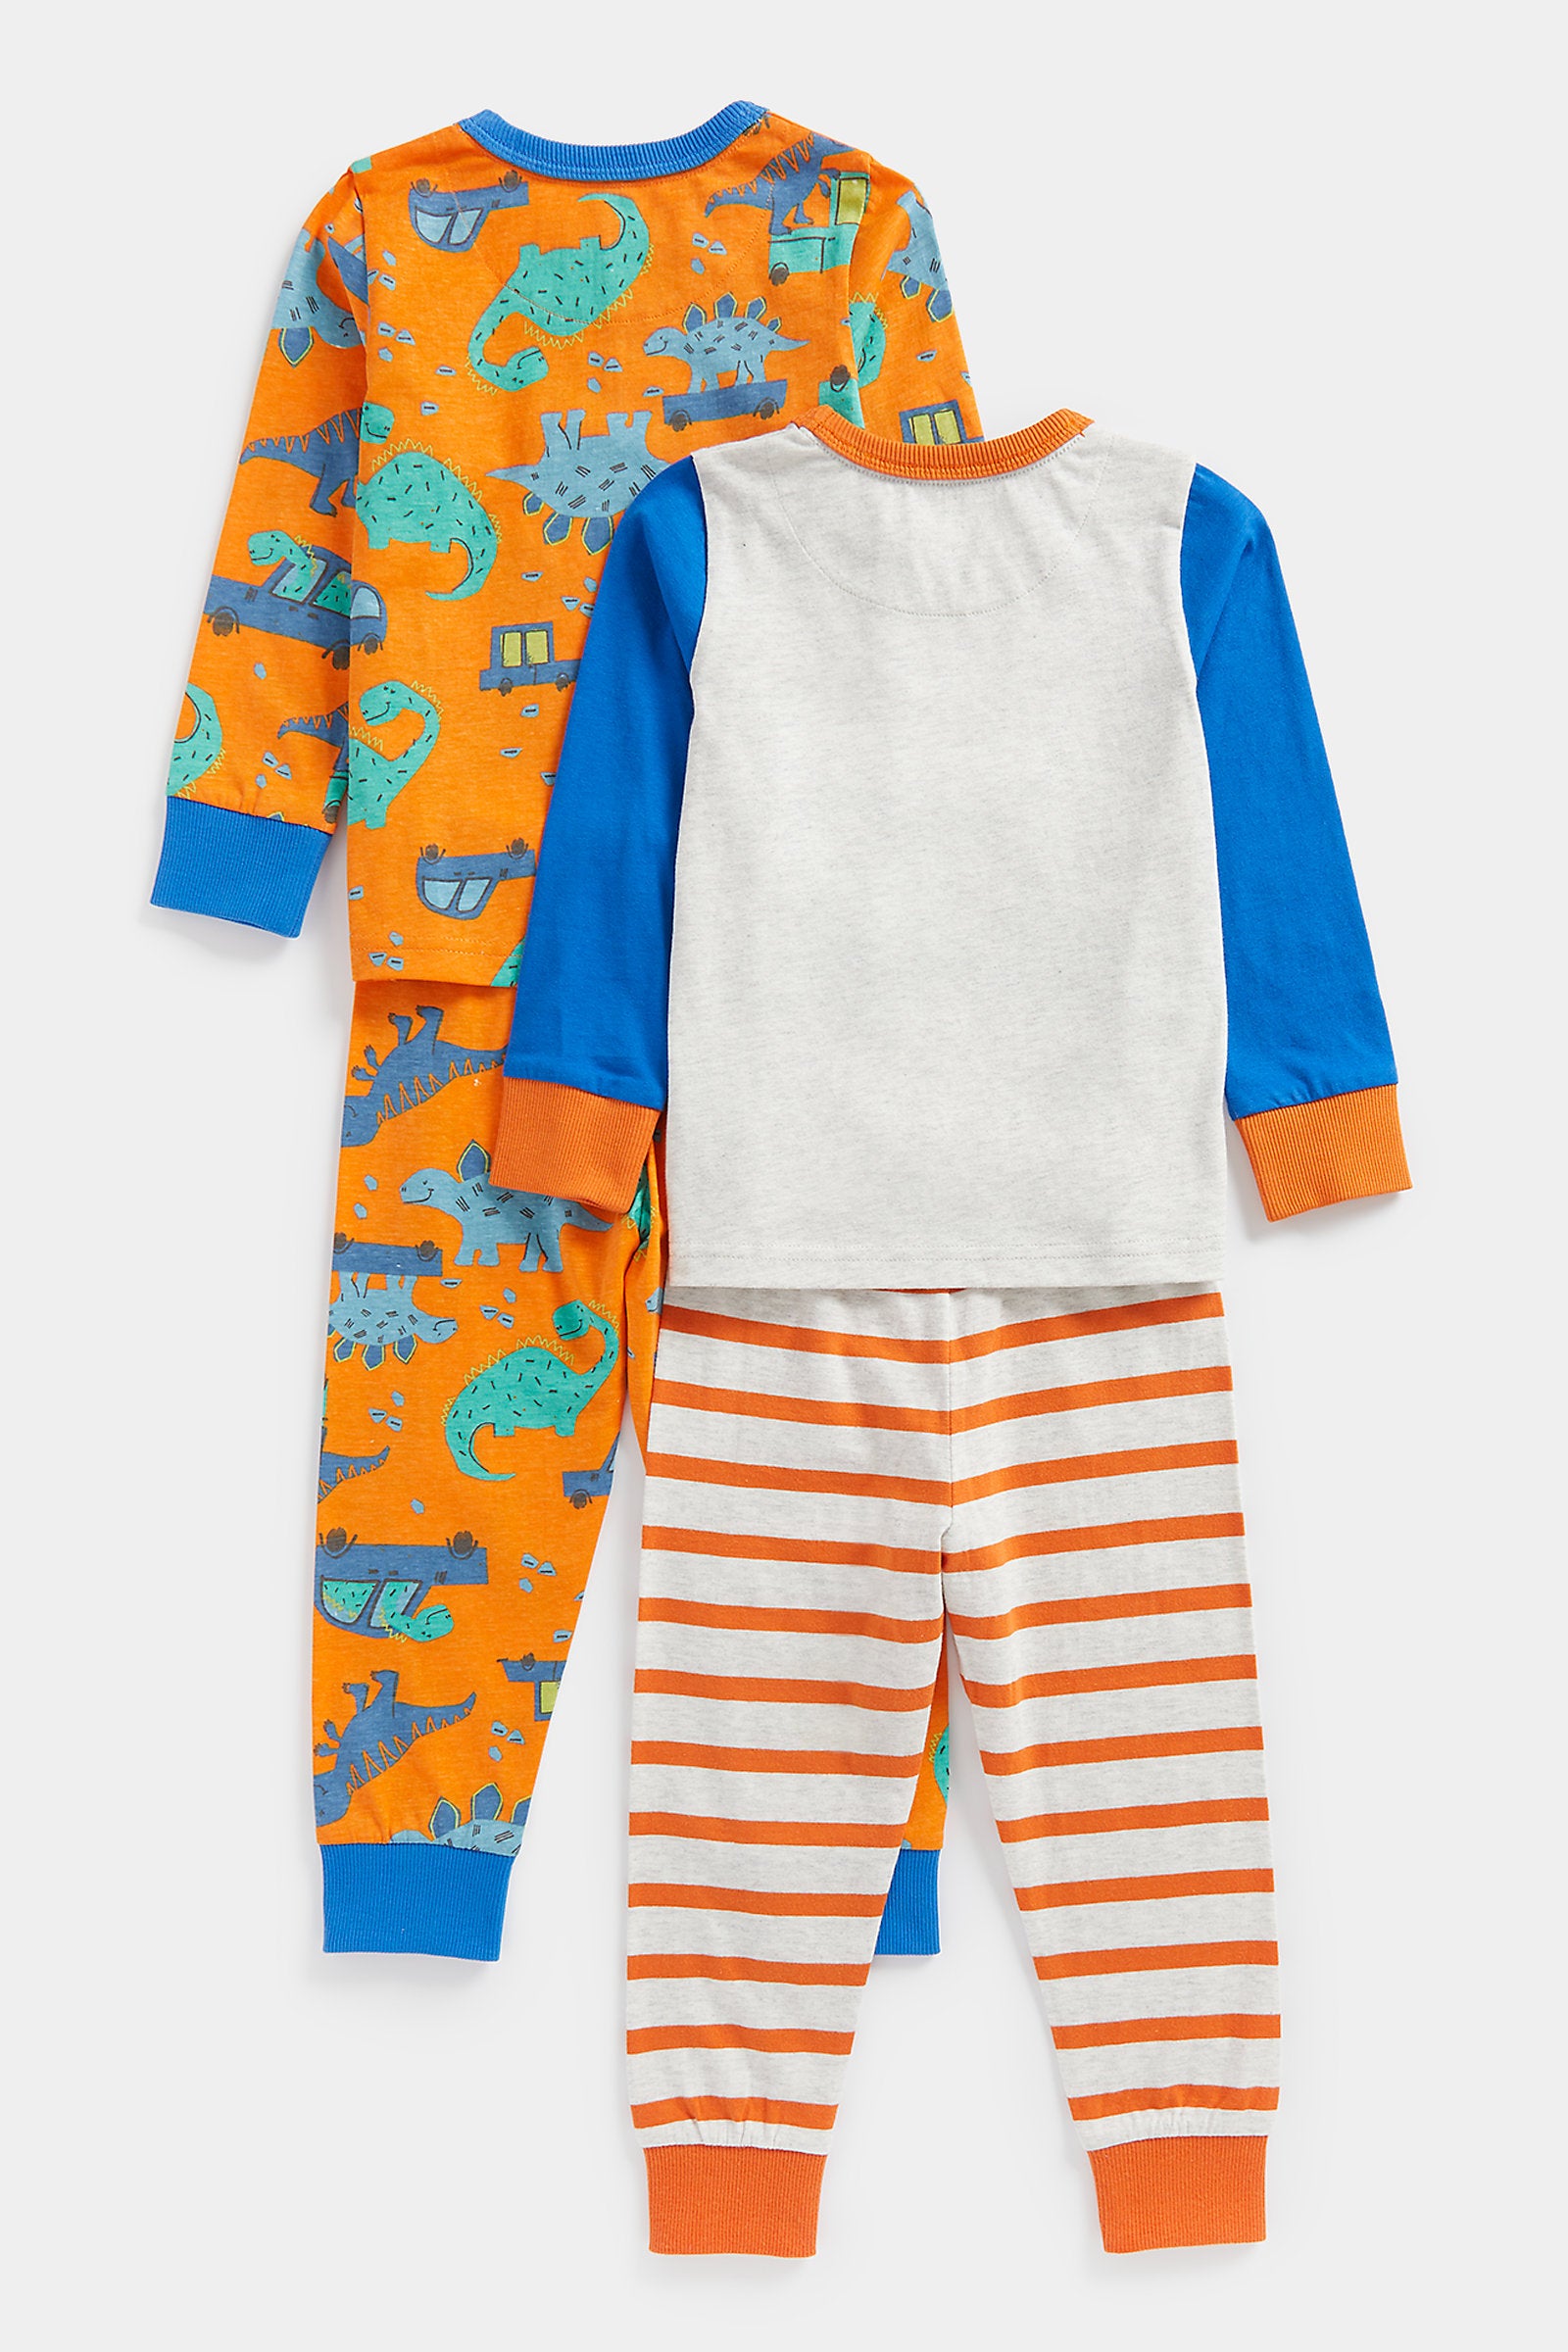 Mothercare Let'S Go Pyjamas - 2 Pack